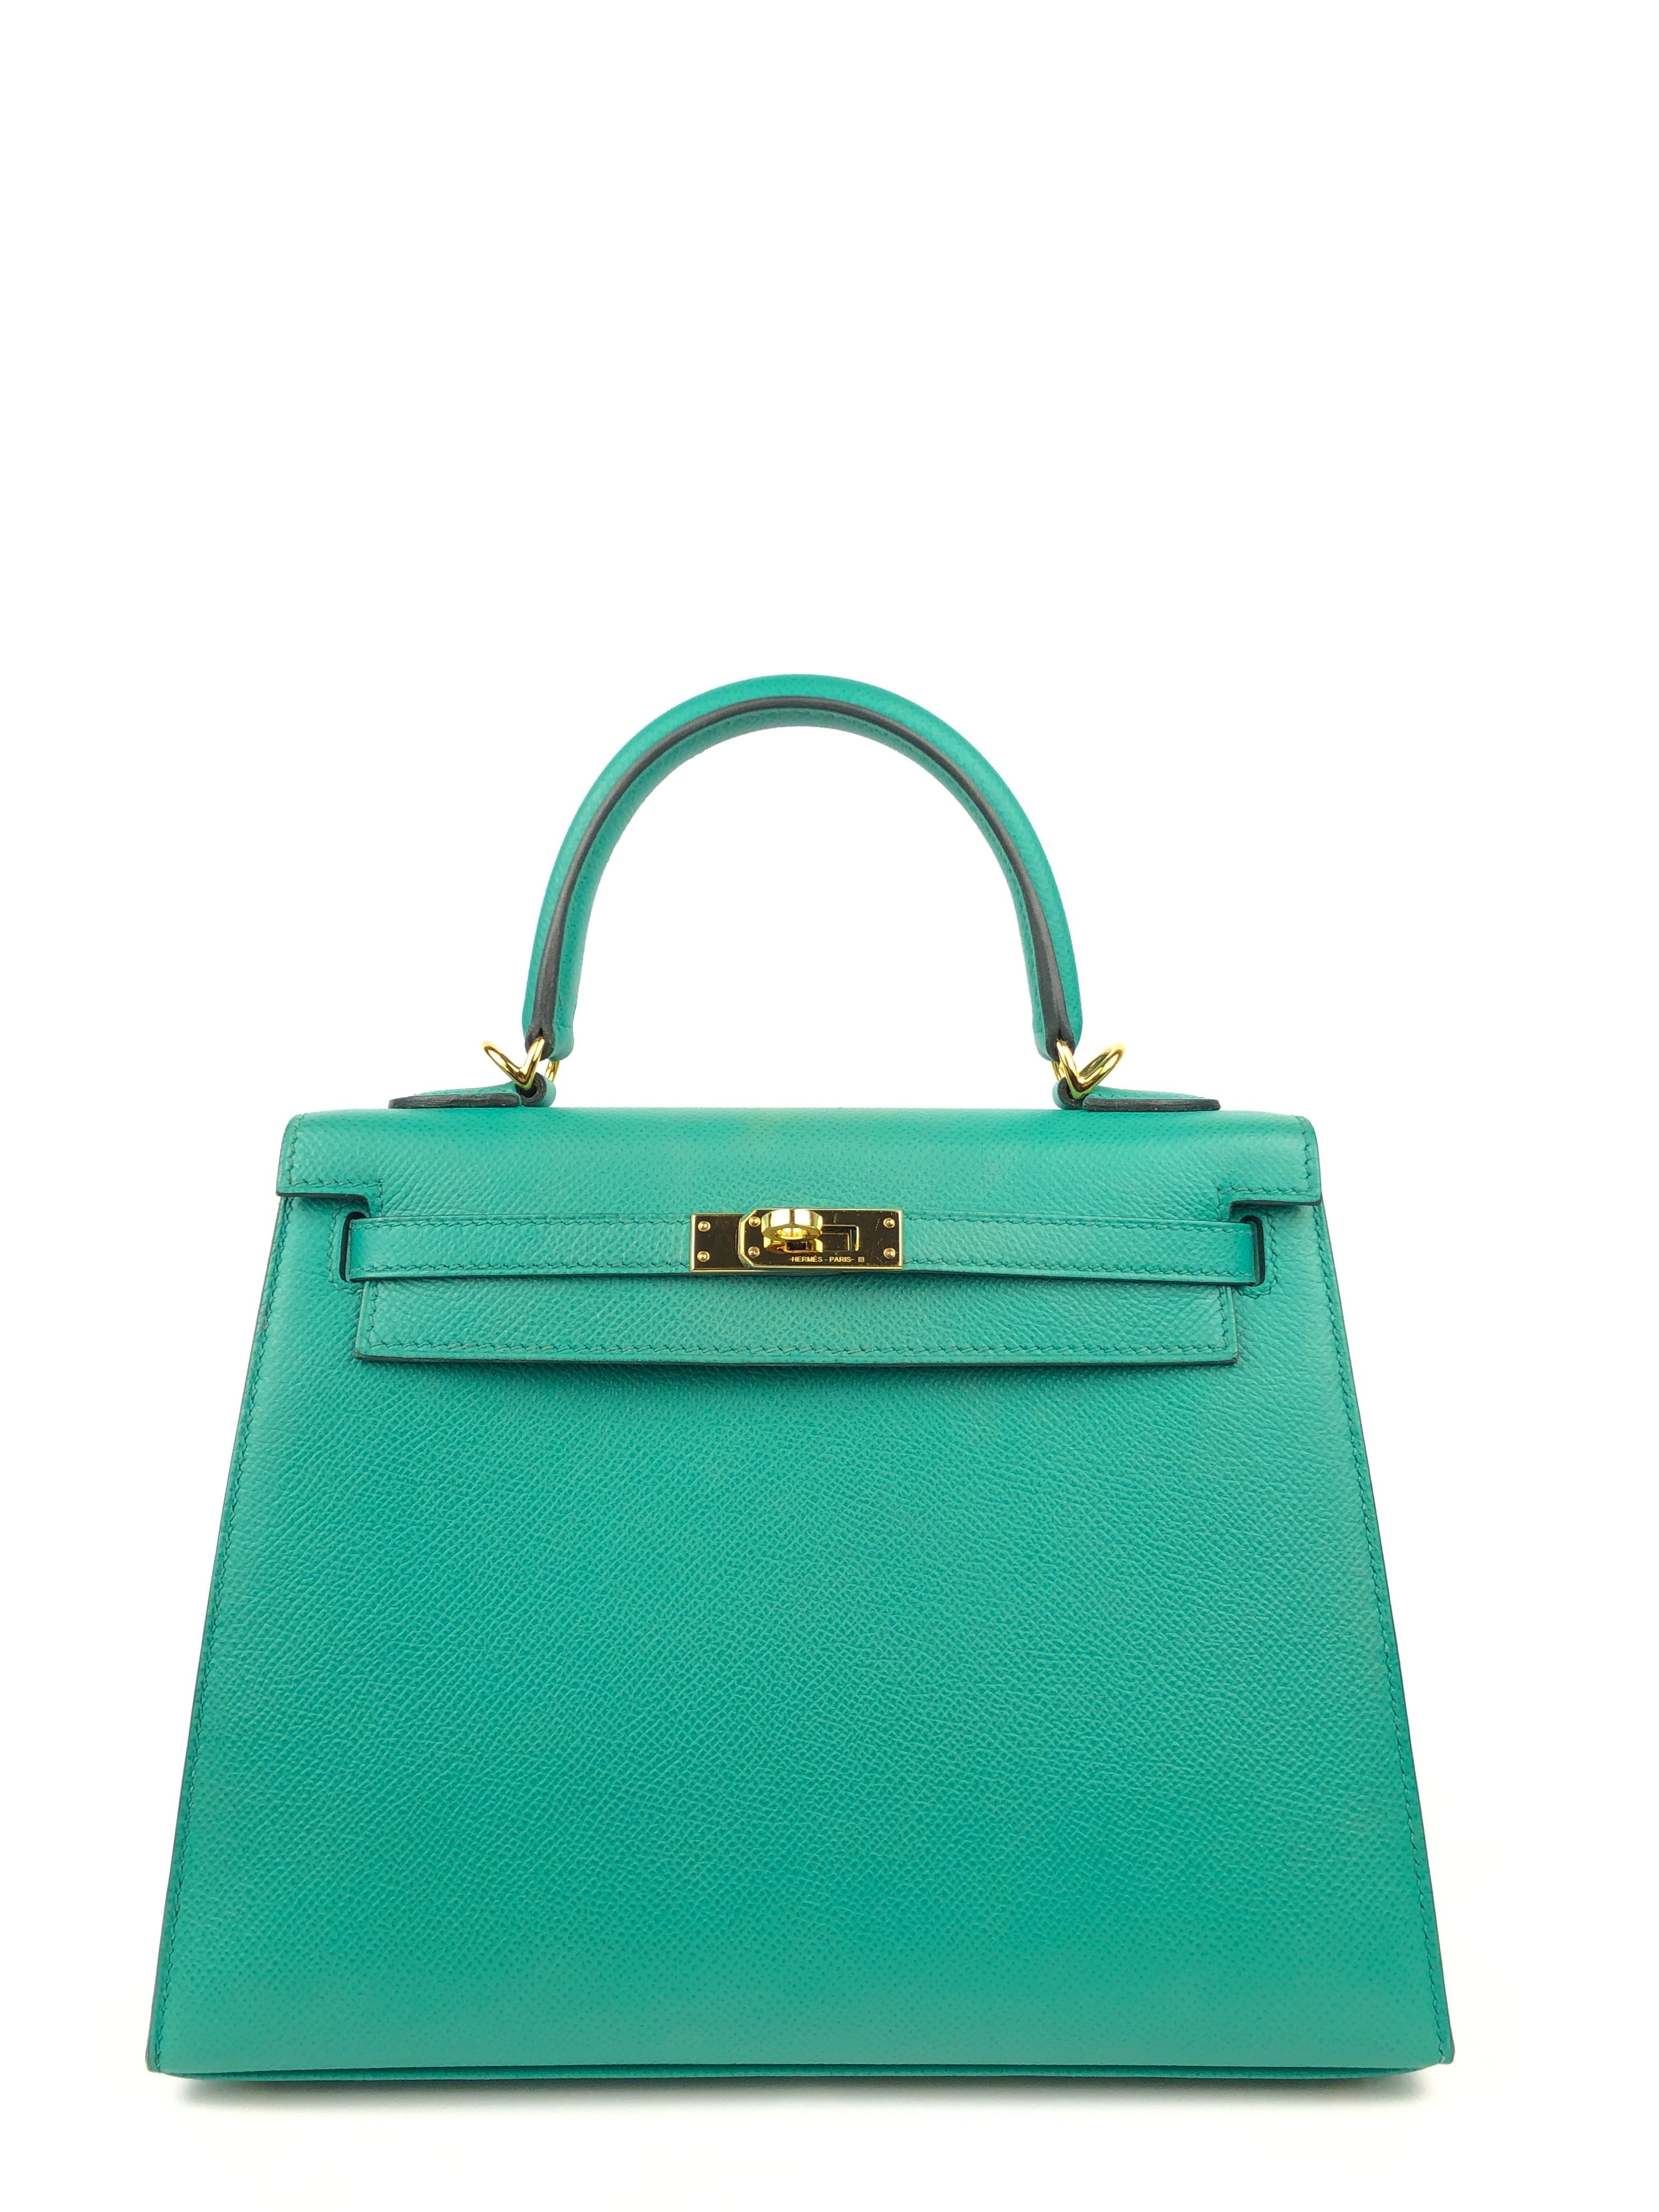 Stunning Hermes Kelly 25 Vert Verone Epsom Sellier Gold Hardware. Excellent Pristine Condition, Light Hairlines on Hardware. D Stamp 2019 Full set With Box and Copy of Receipt. 

Shop with Confidence from Lux Addicts. Authenticity Guaranteed!